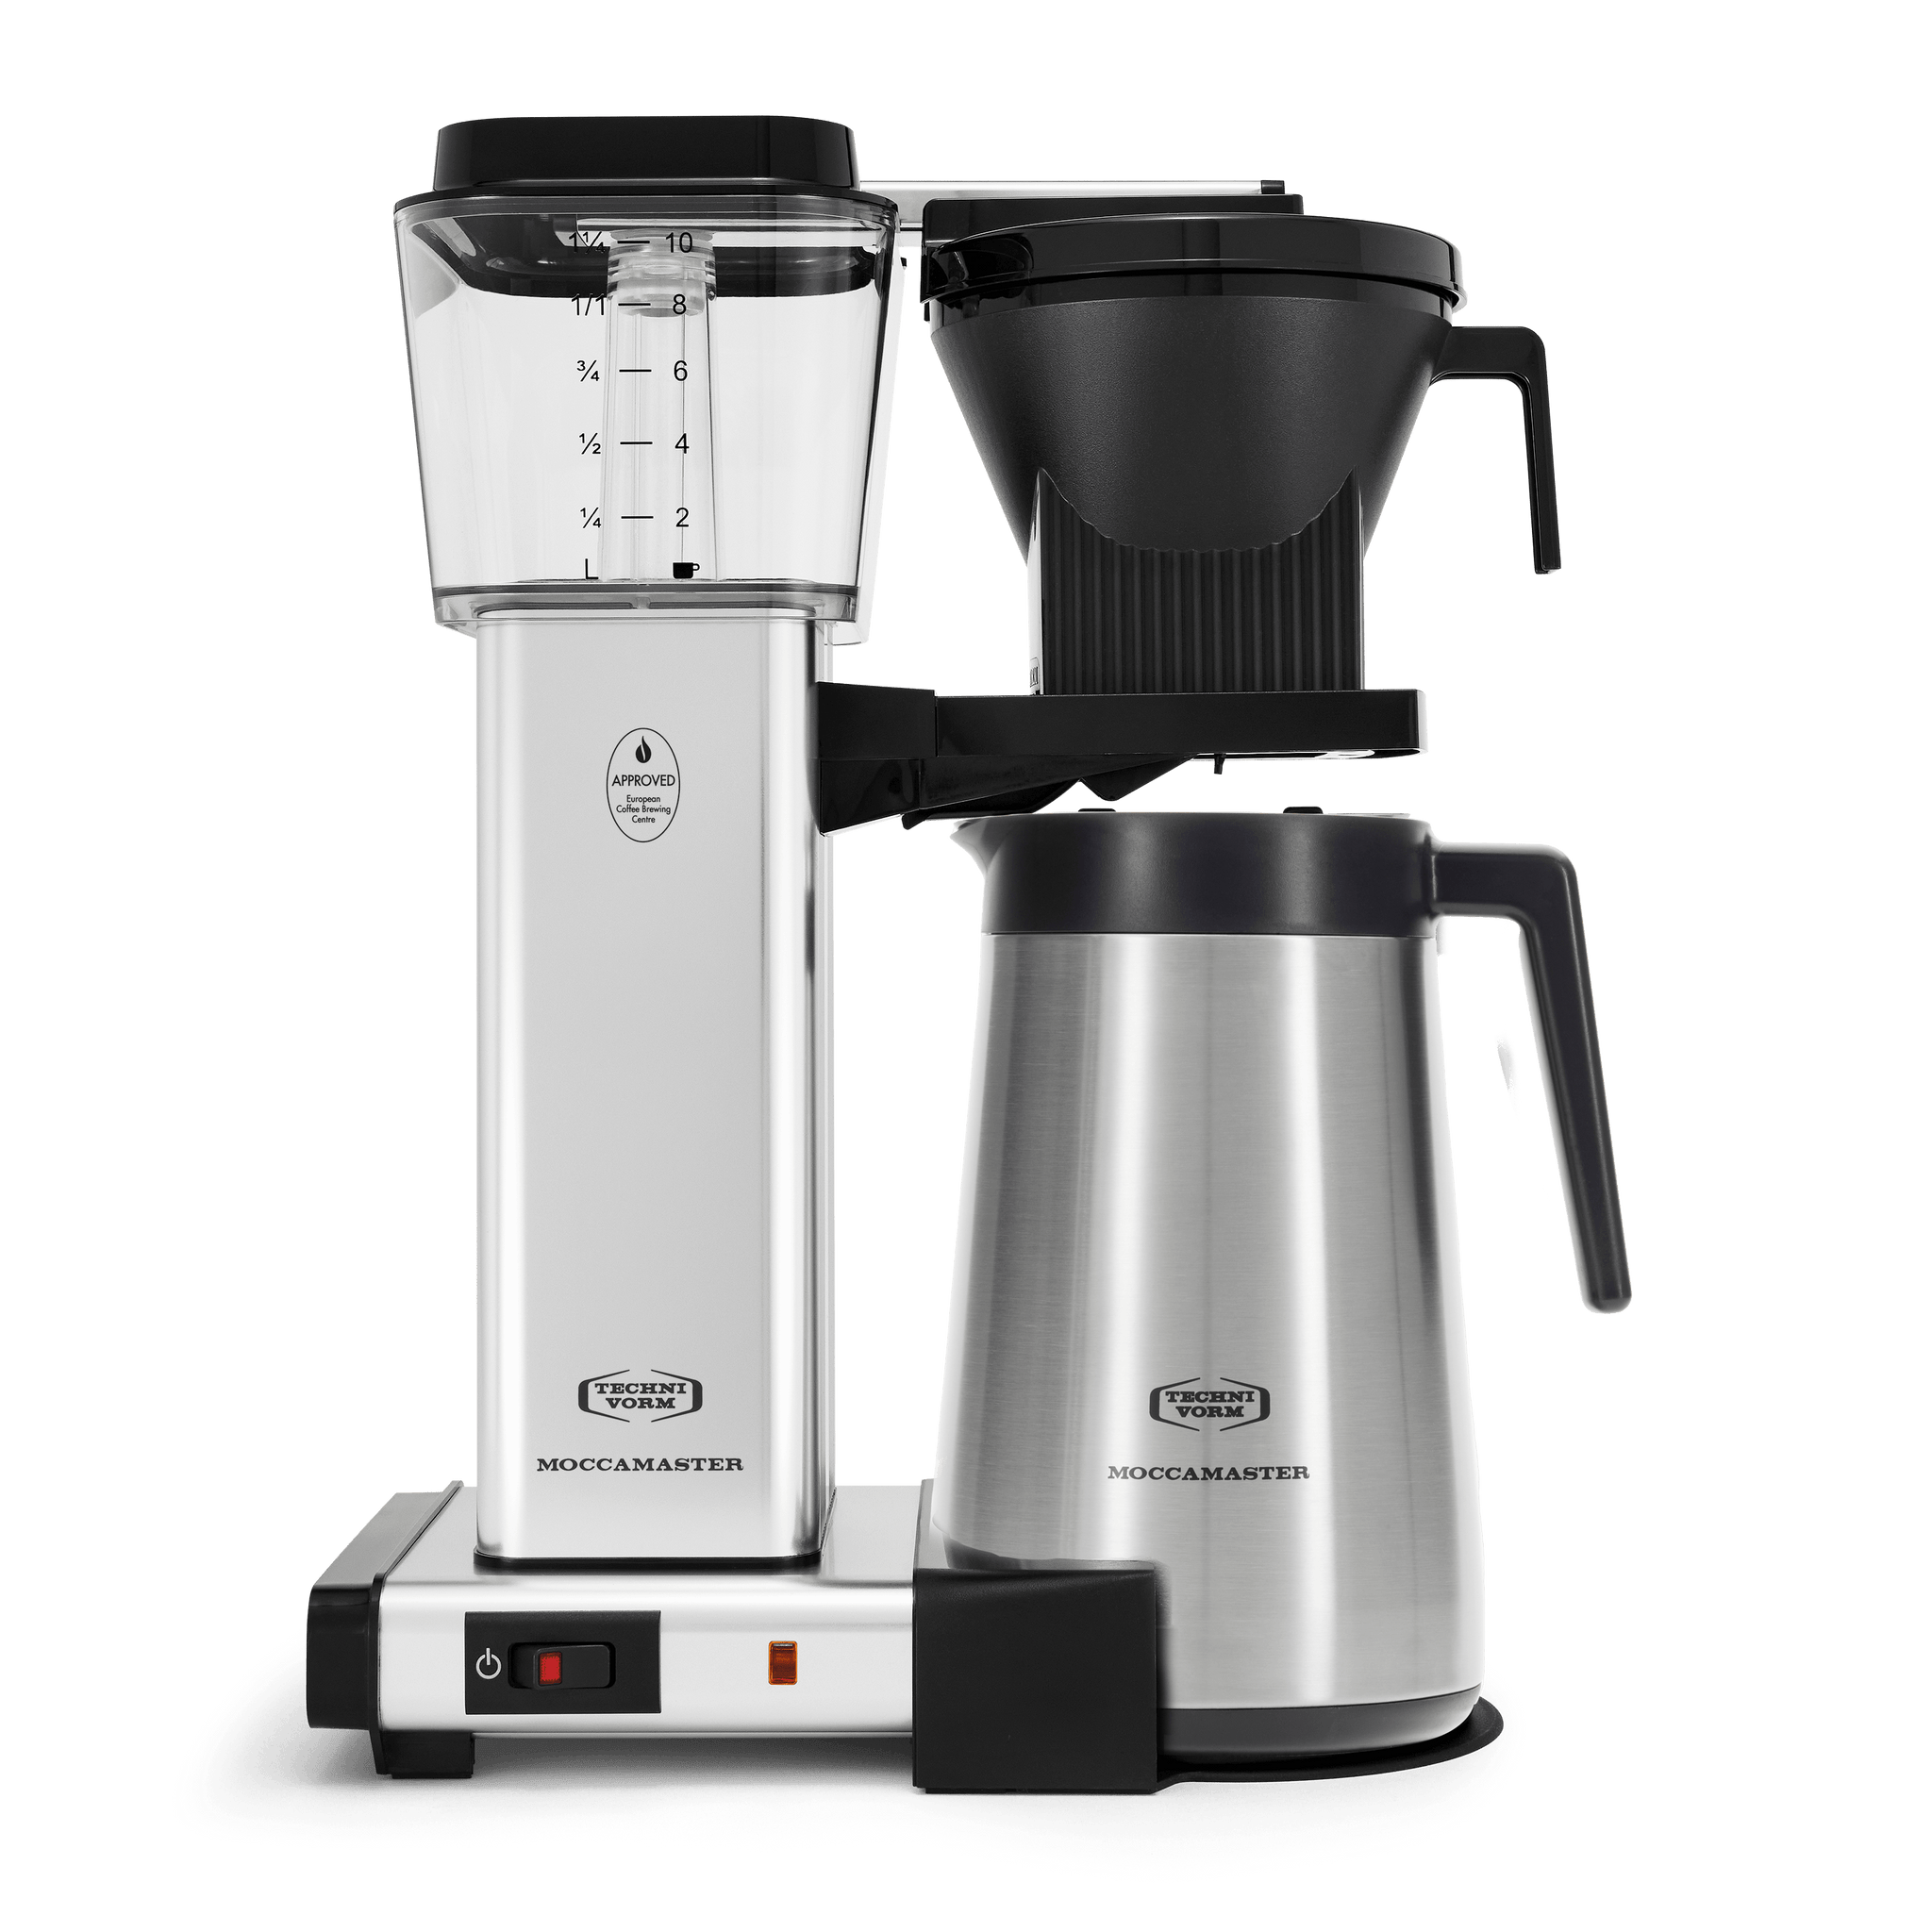 Wolf Gourmet - 10-Cup Coffee Maker with Water Filtration - Stainless Steel/Red Knob